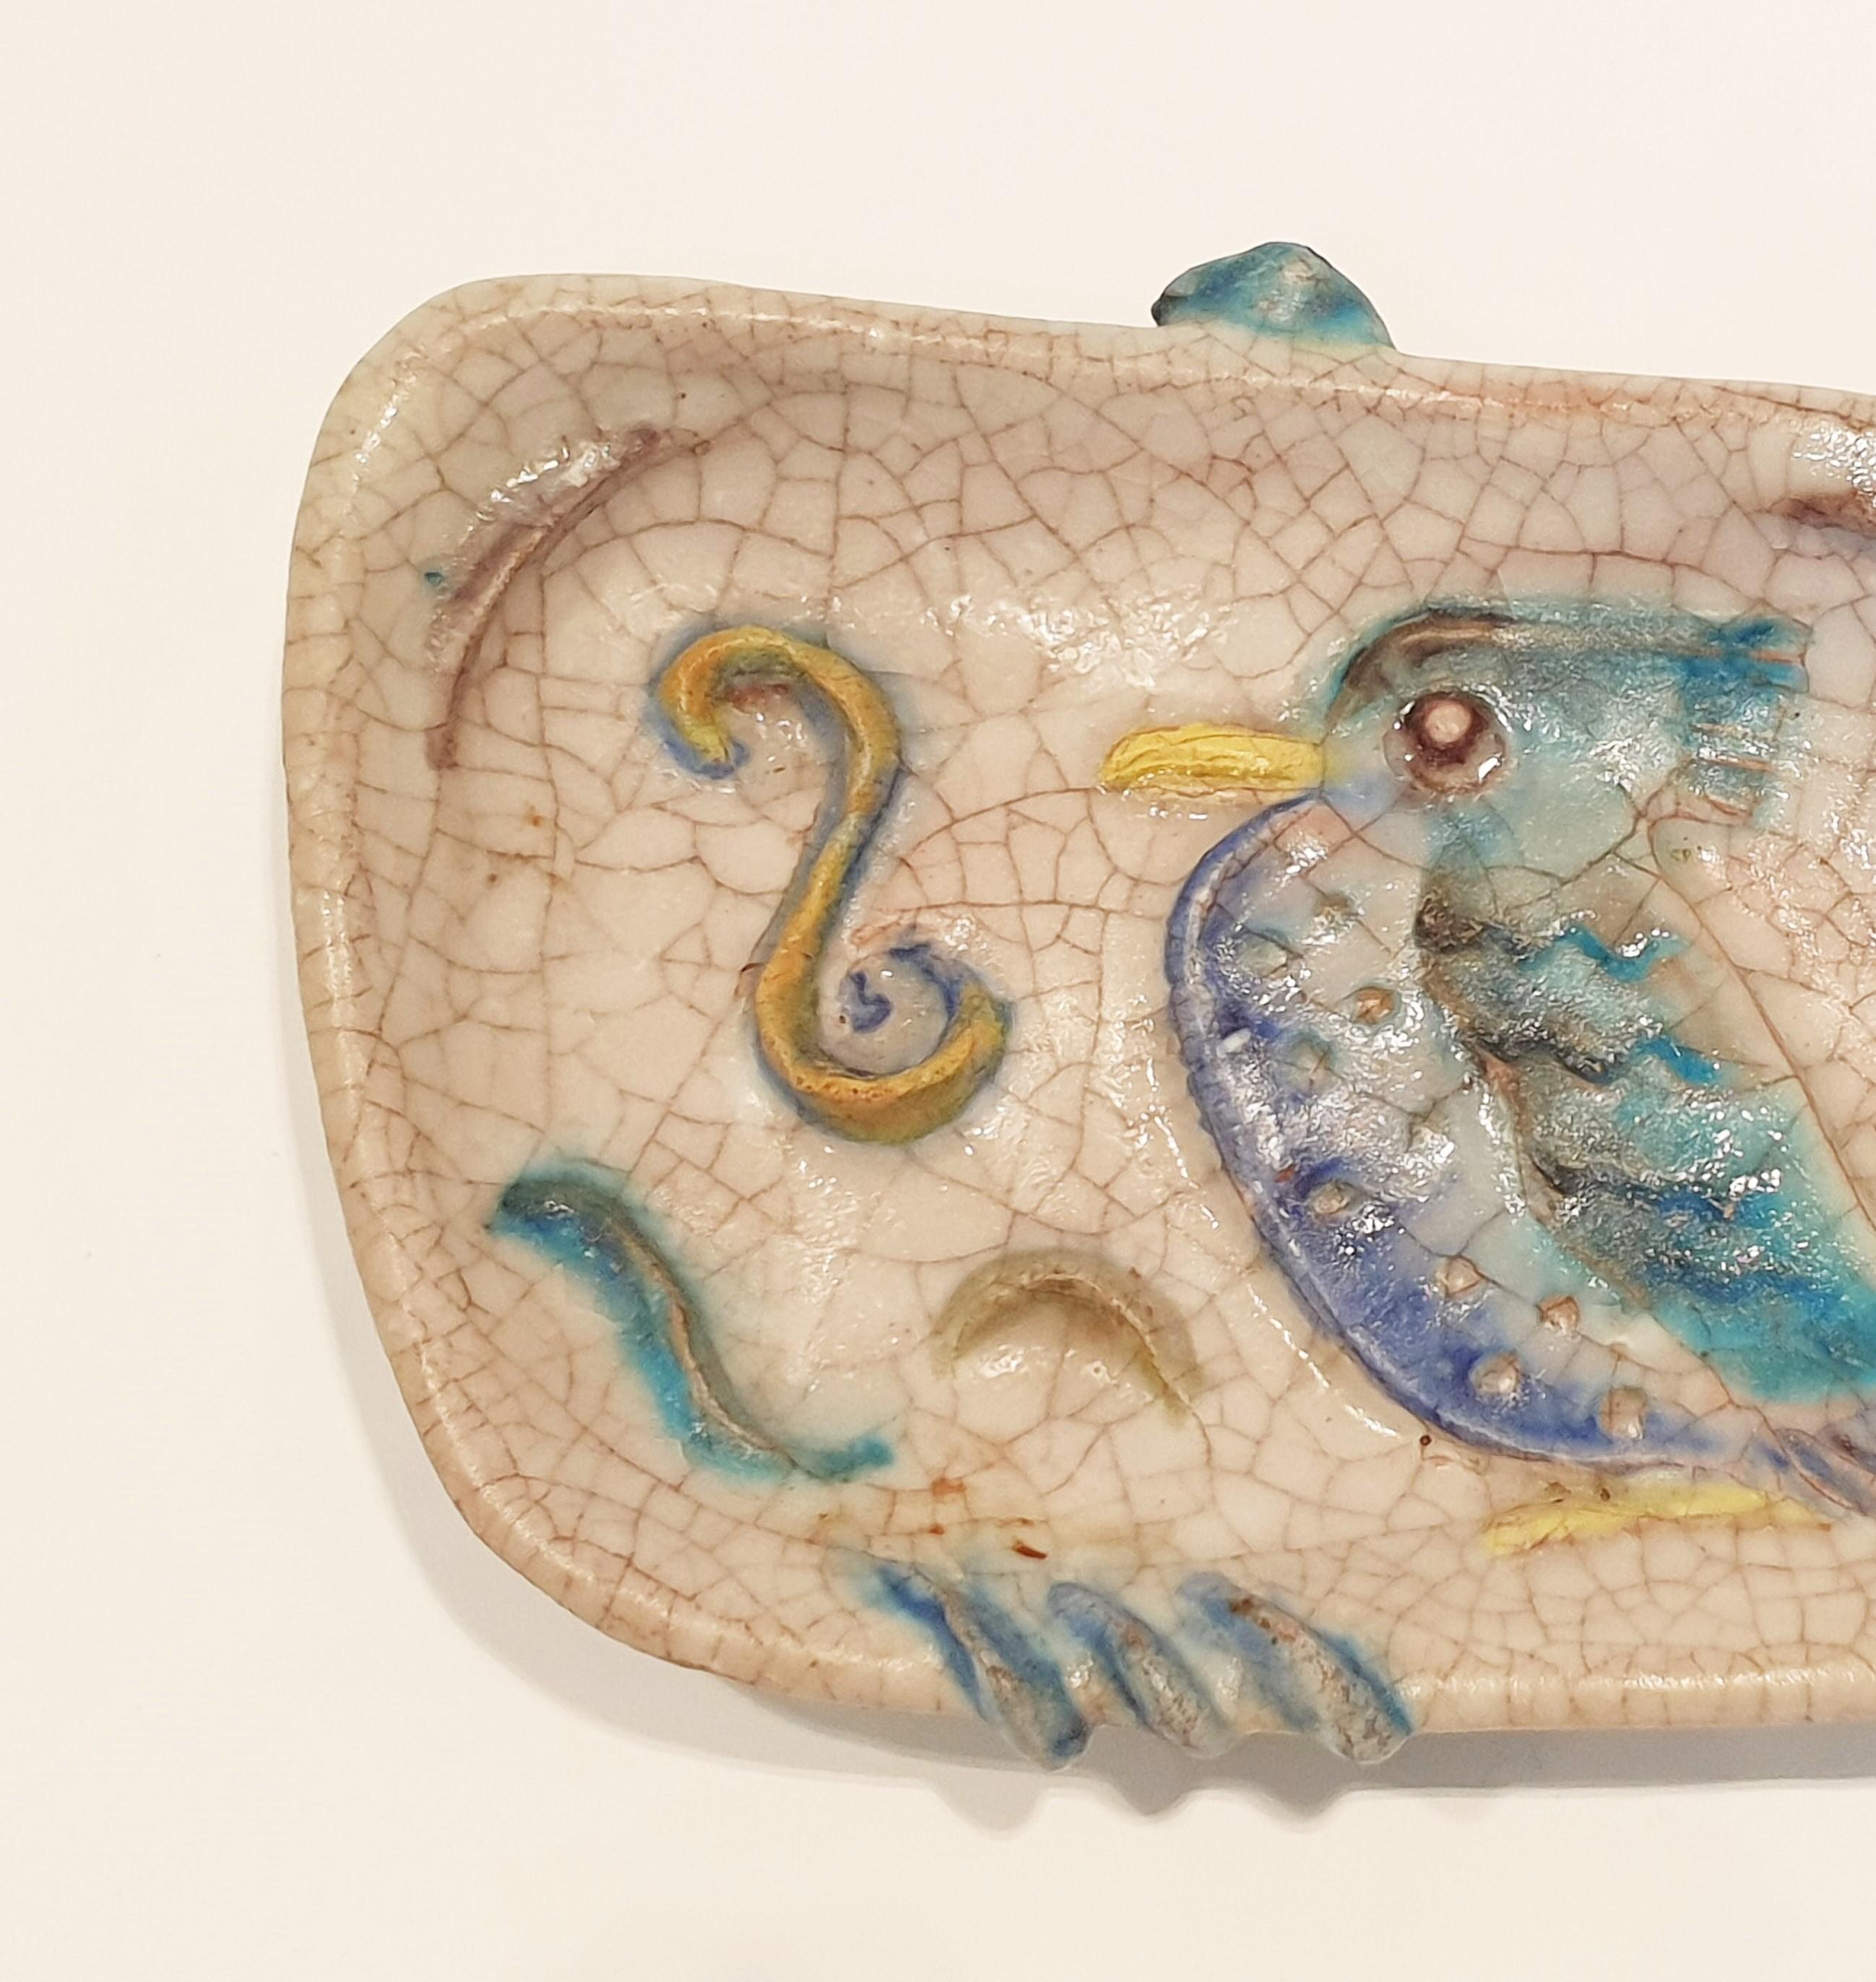 Colourful mid century, Italian ceramic dish with raised decoration of a bird in crackle glaze. Signed to the base Fantoni.
We have three dishes available.